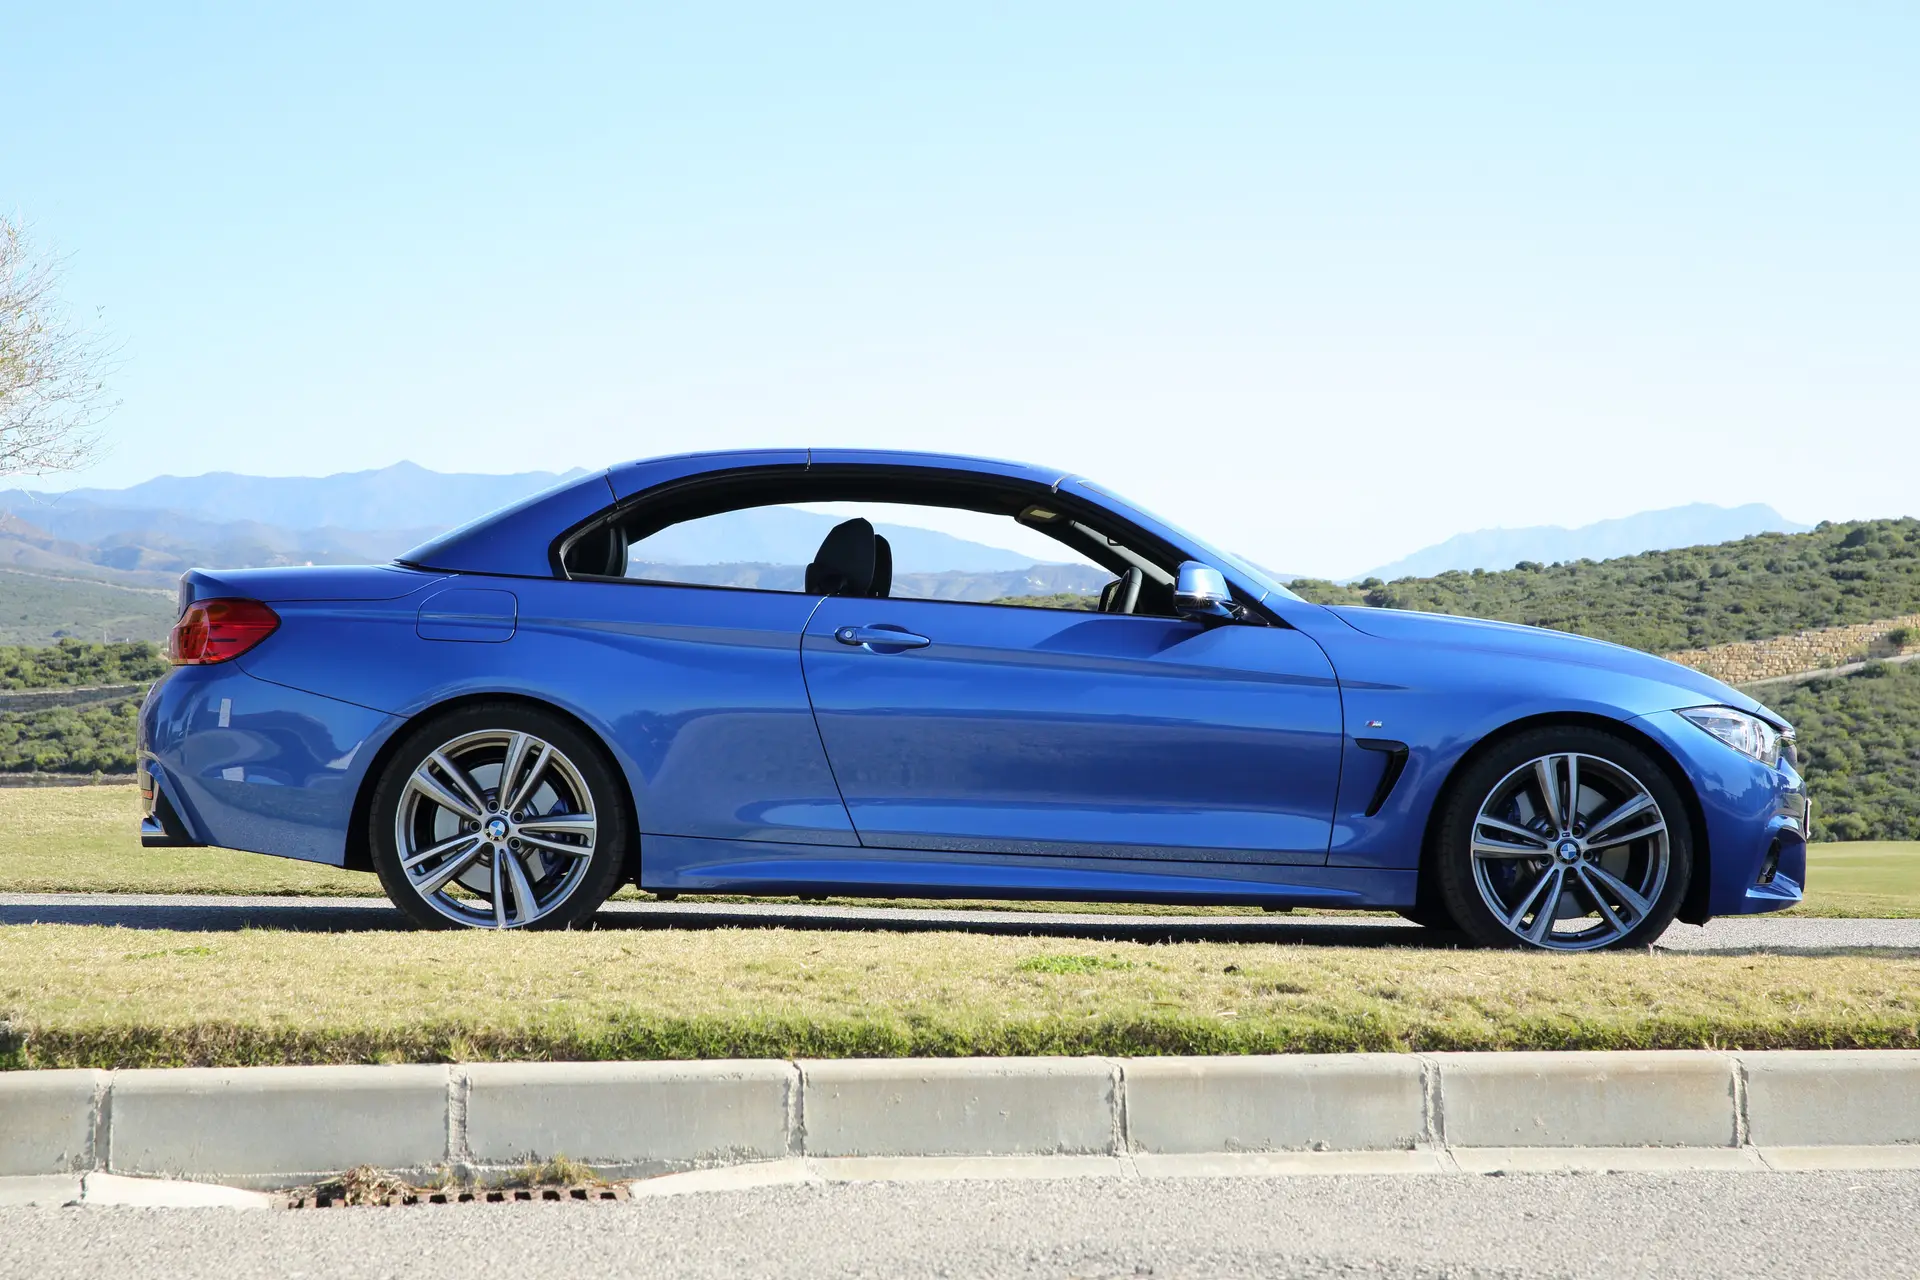 BMW 4 Series Convertible (2014-2020) Review: exterior side photo of the BMW 4 Series Convertible 